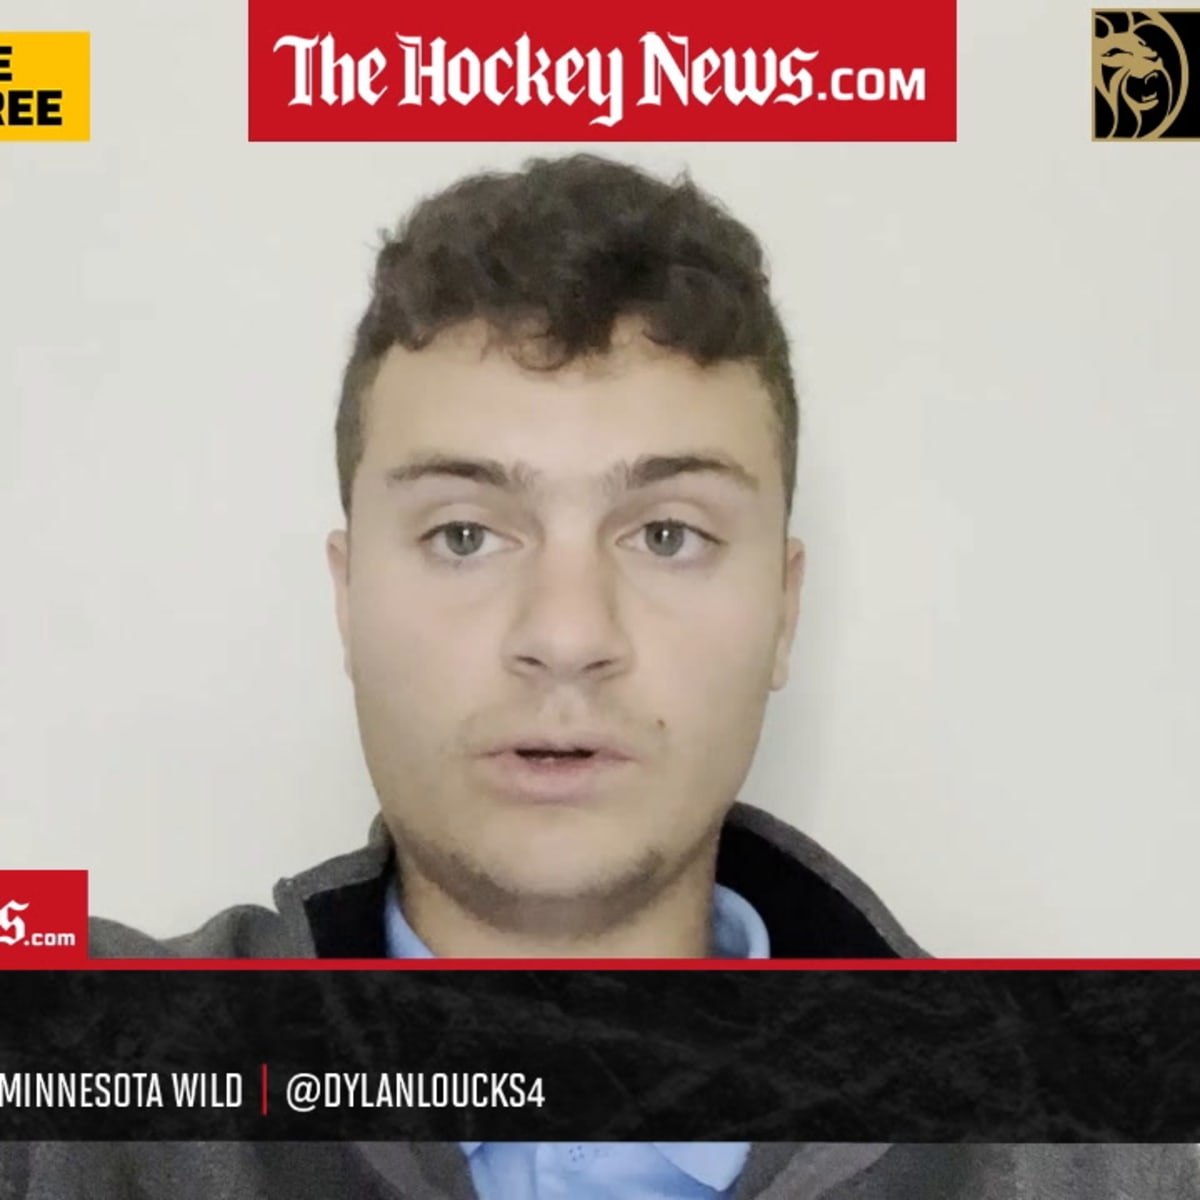 Jared Spurgeon in trouble after vicious cross-check against Blues? - Sports  Illustrated Minnesota Sports, News, Analysis, and More